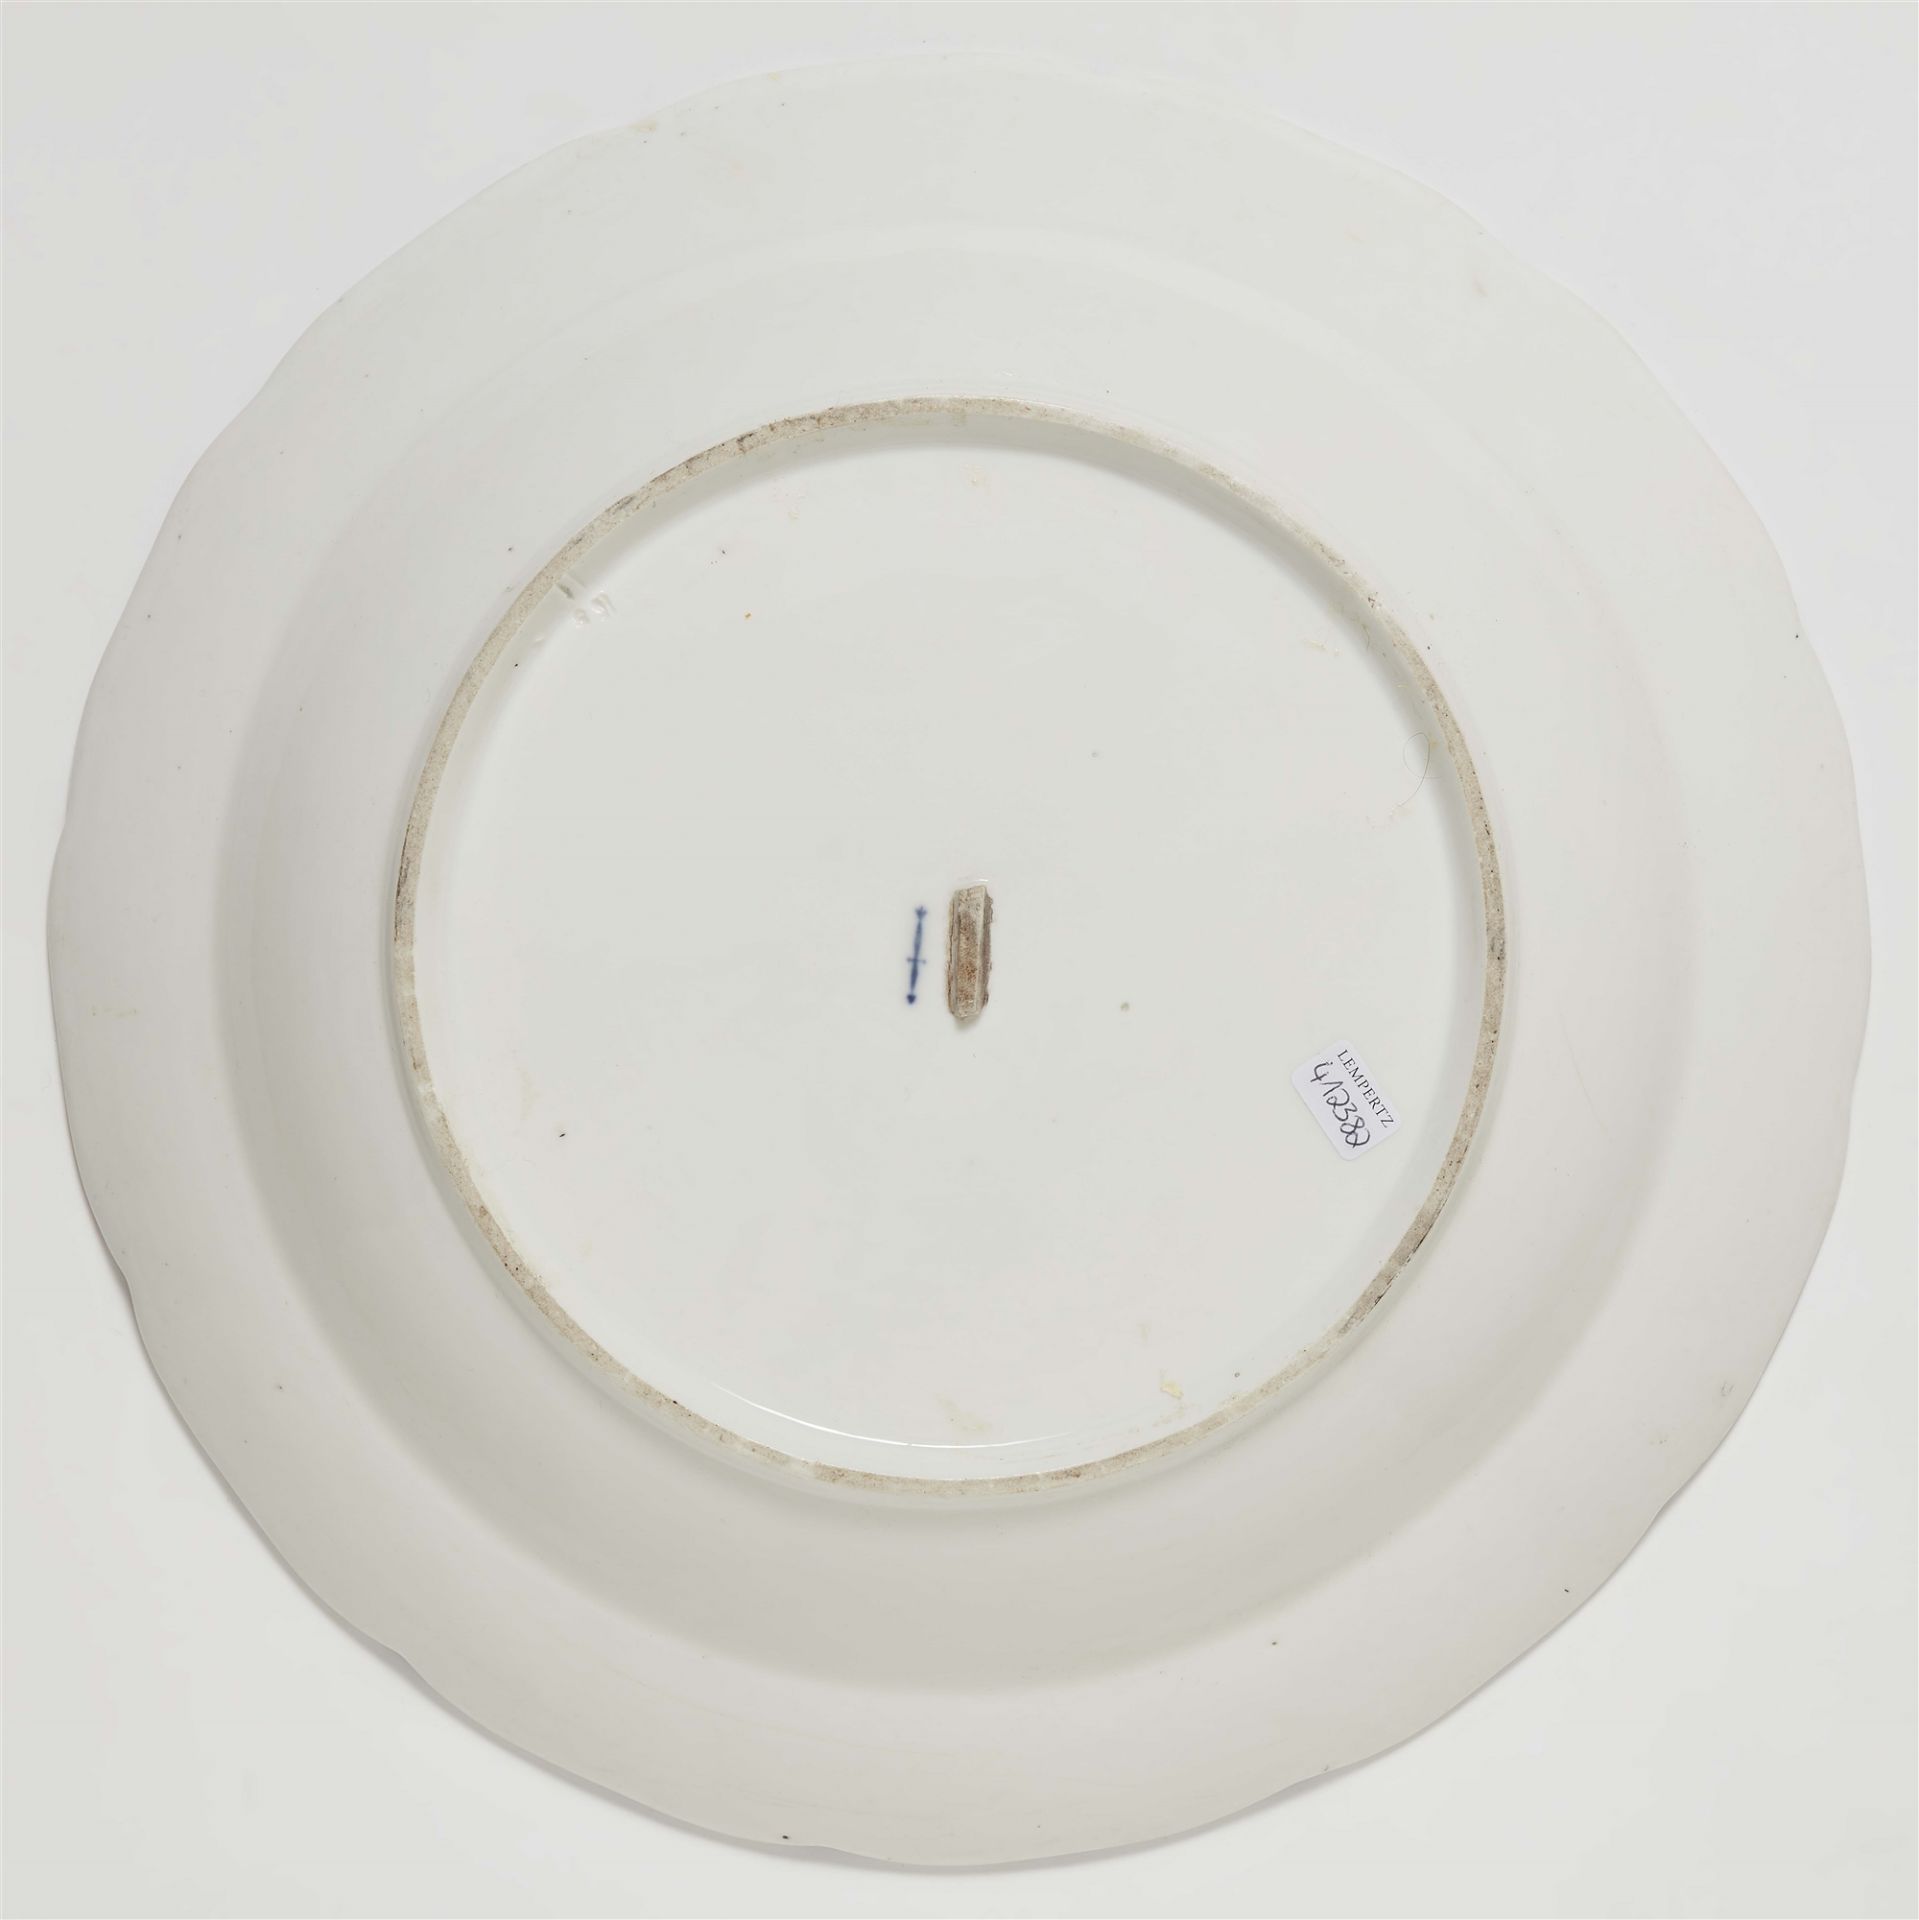 A rare Berlin KPM porcelain plate from the Japanese dinner service - Image 2 of 2